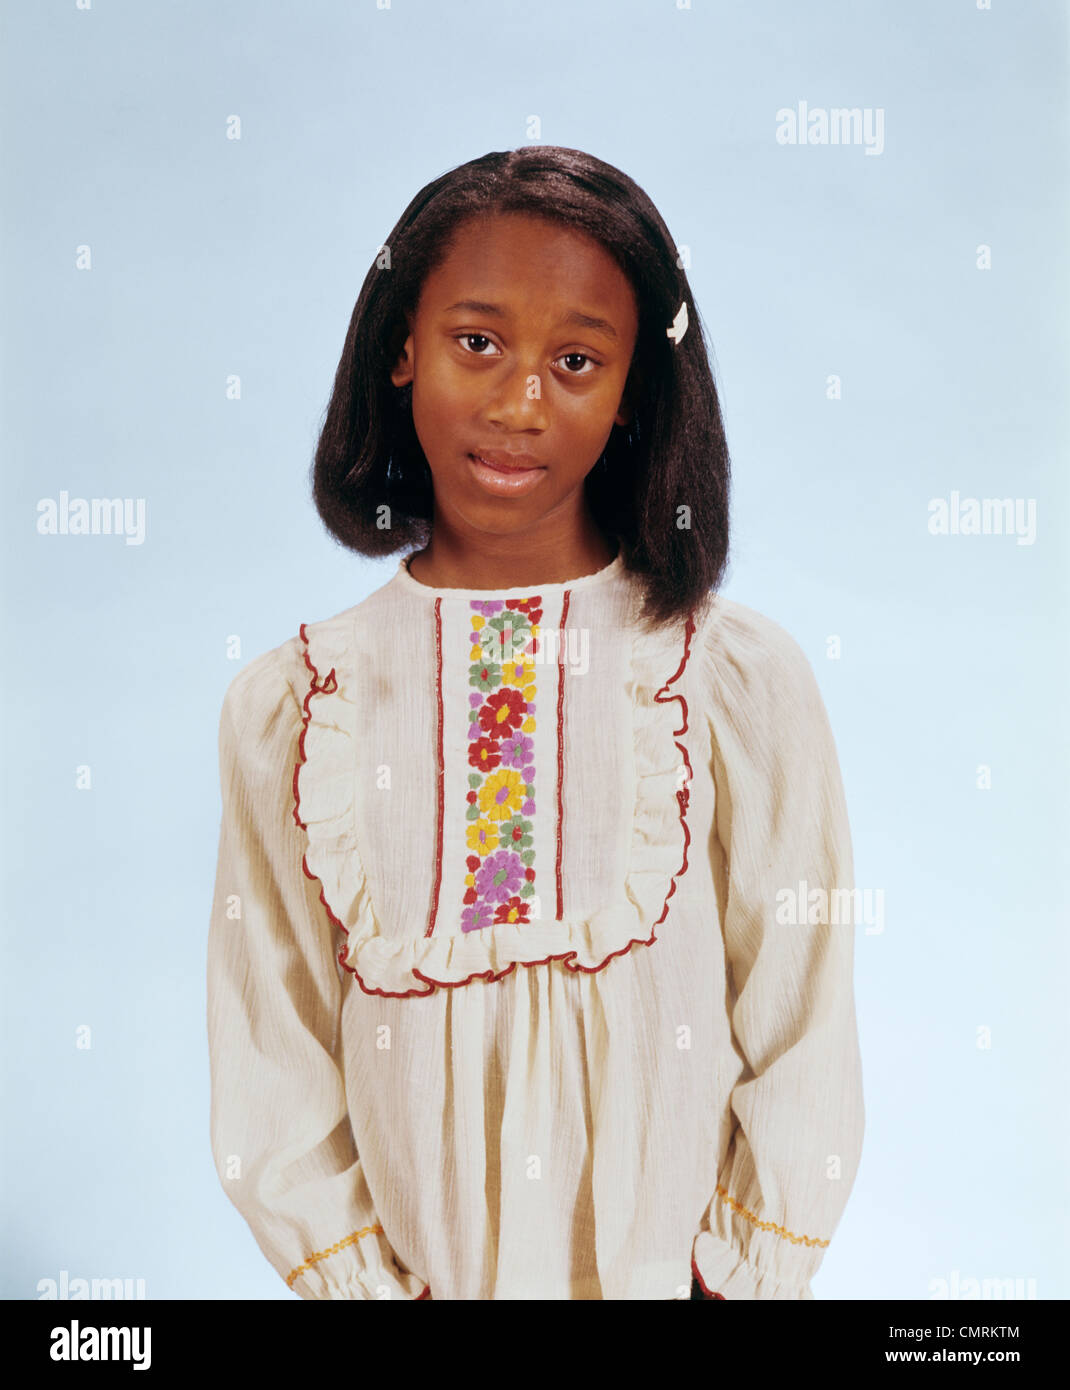 1970 1970s RETRO PORTRAIT OF AFRICAN AMERICAN GIRL WEARING EMBROIDERED PEASANT BLOUSE Stock Photo